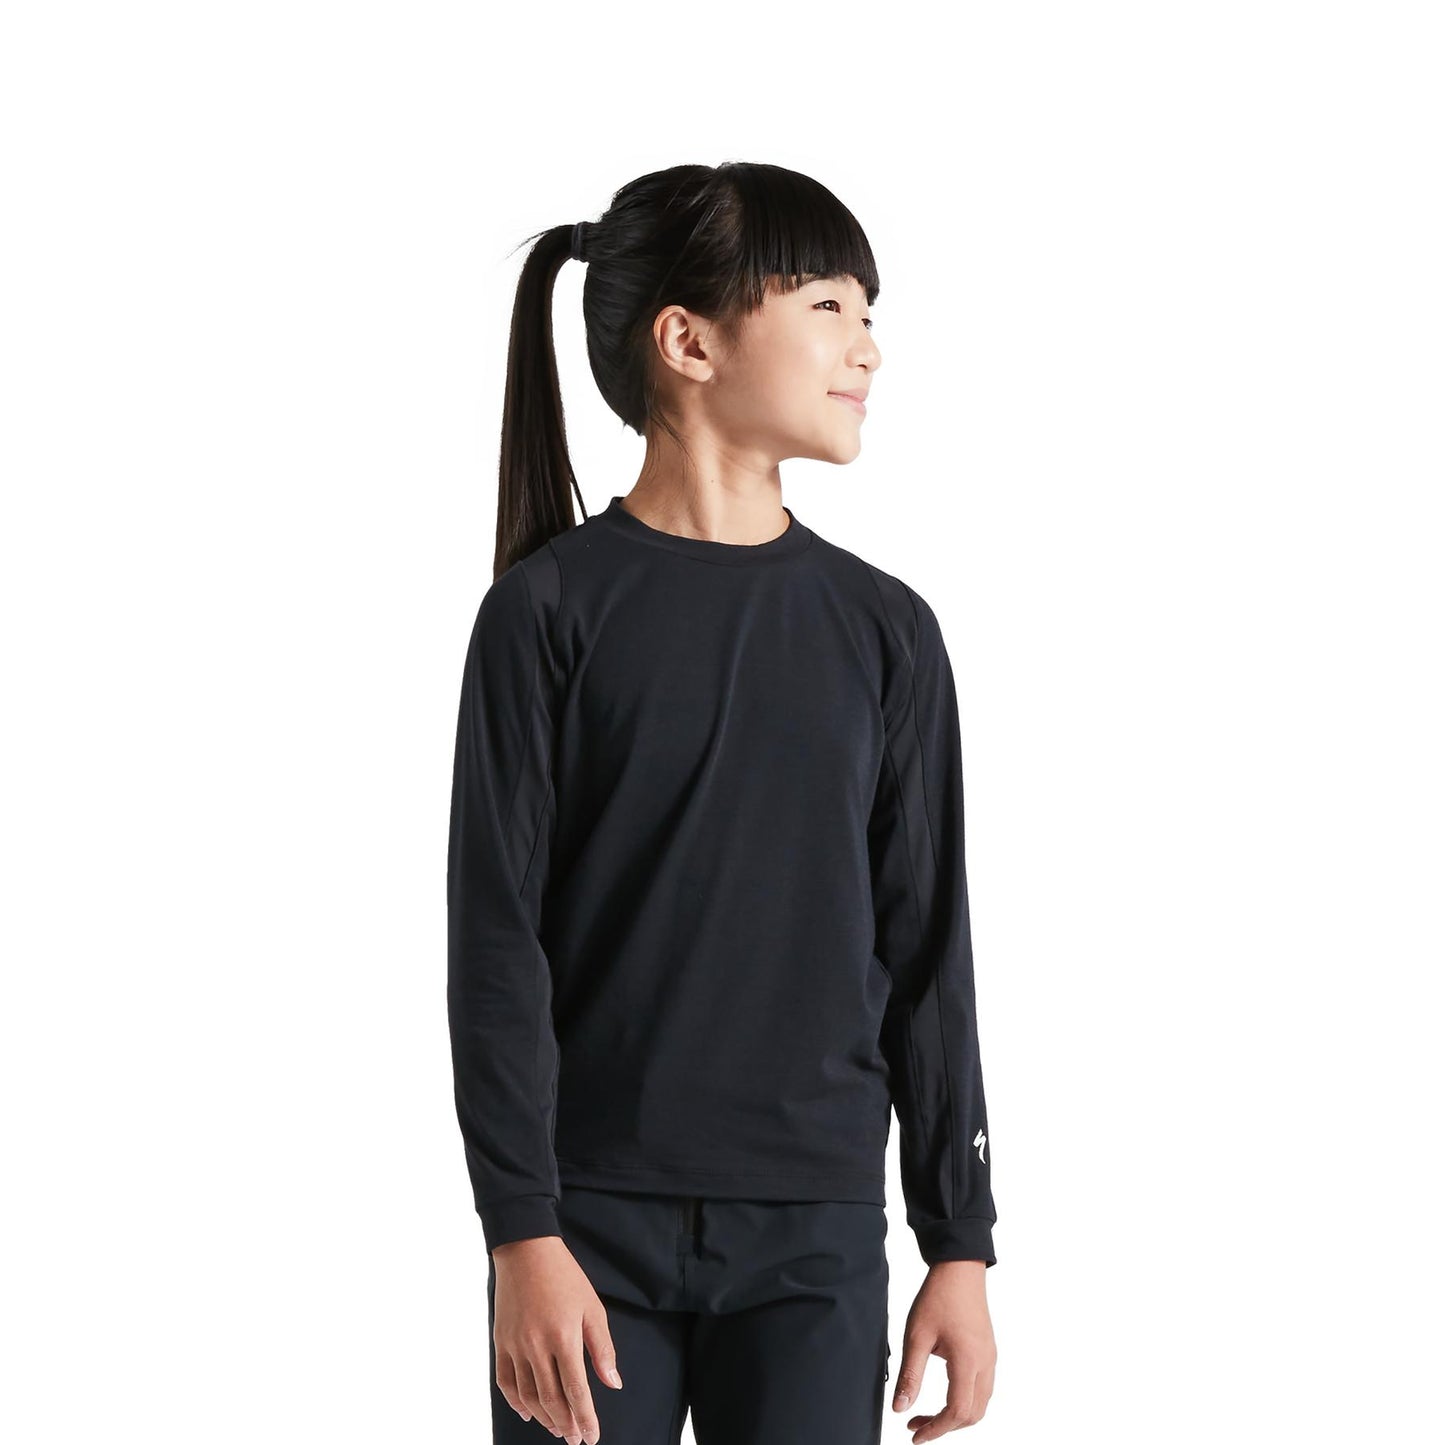 Youth Trail Long Sleeve Jersey in Black